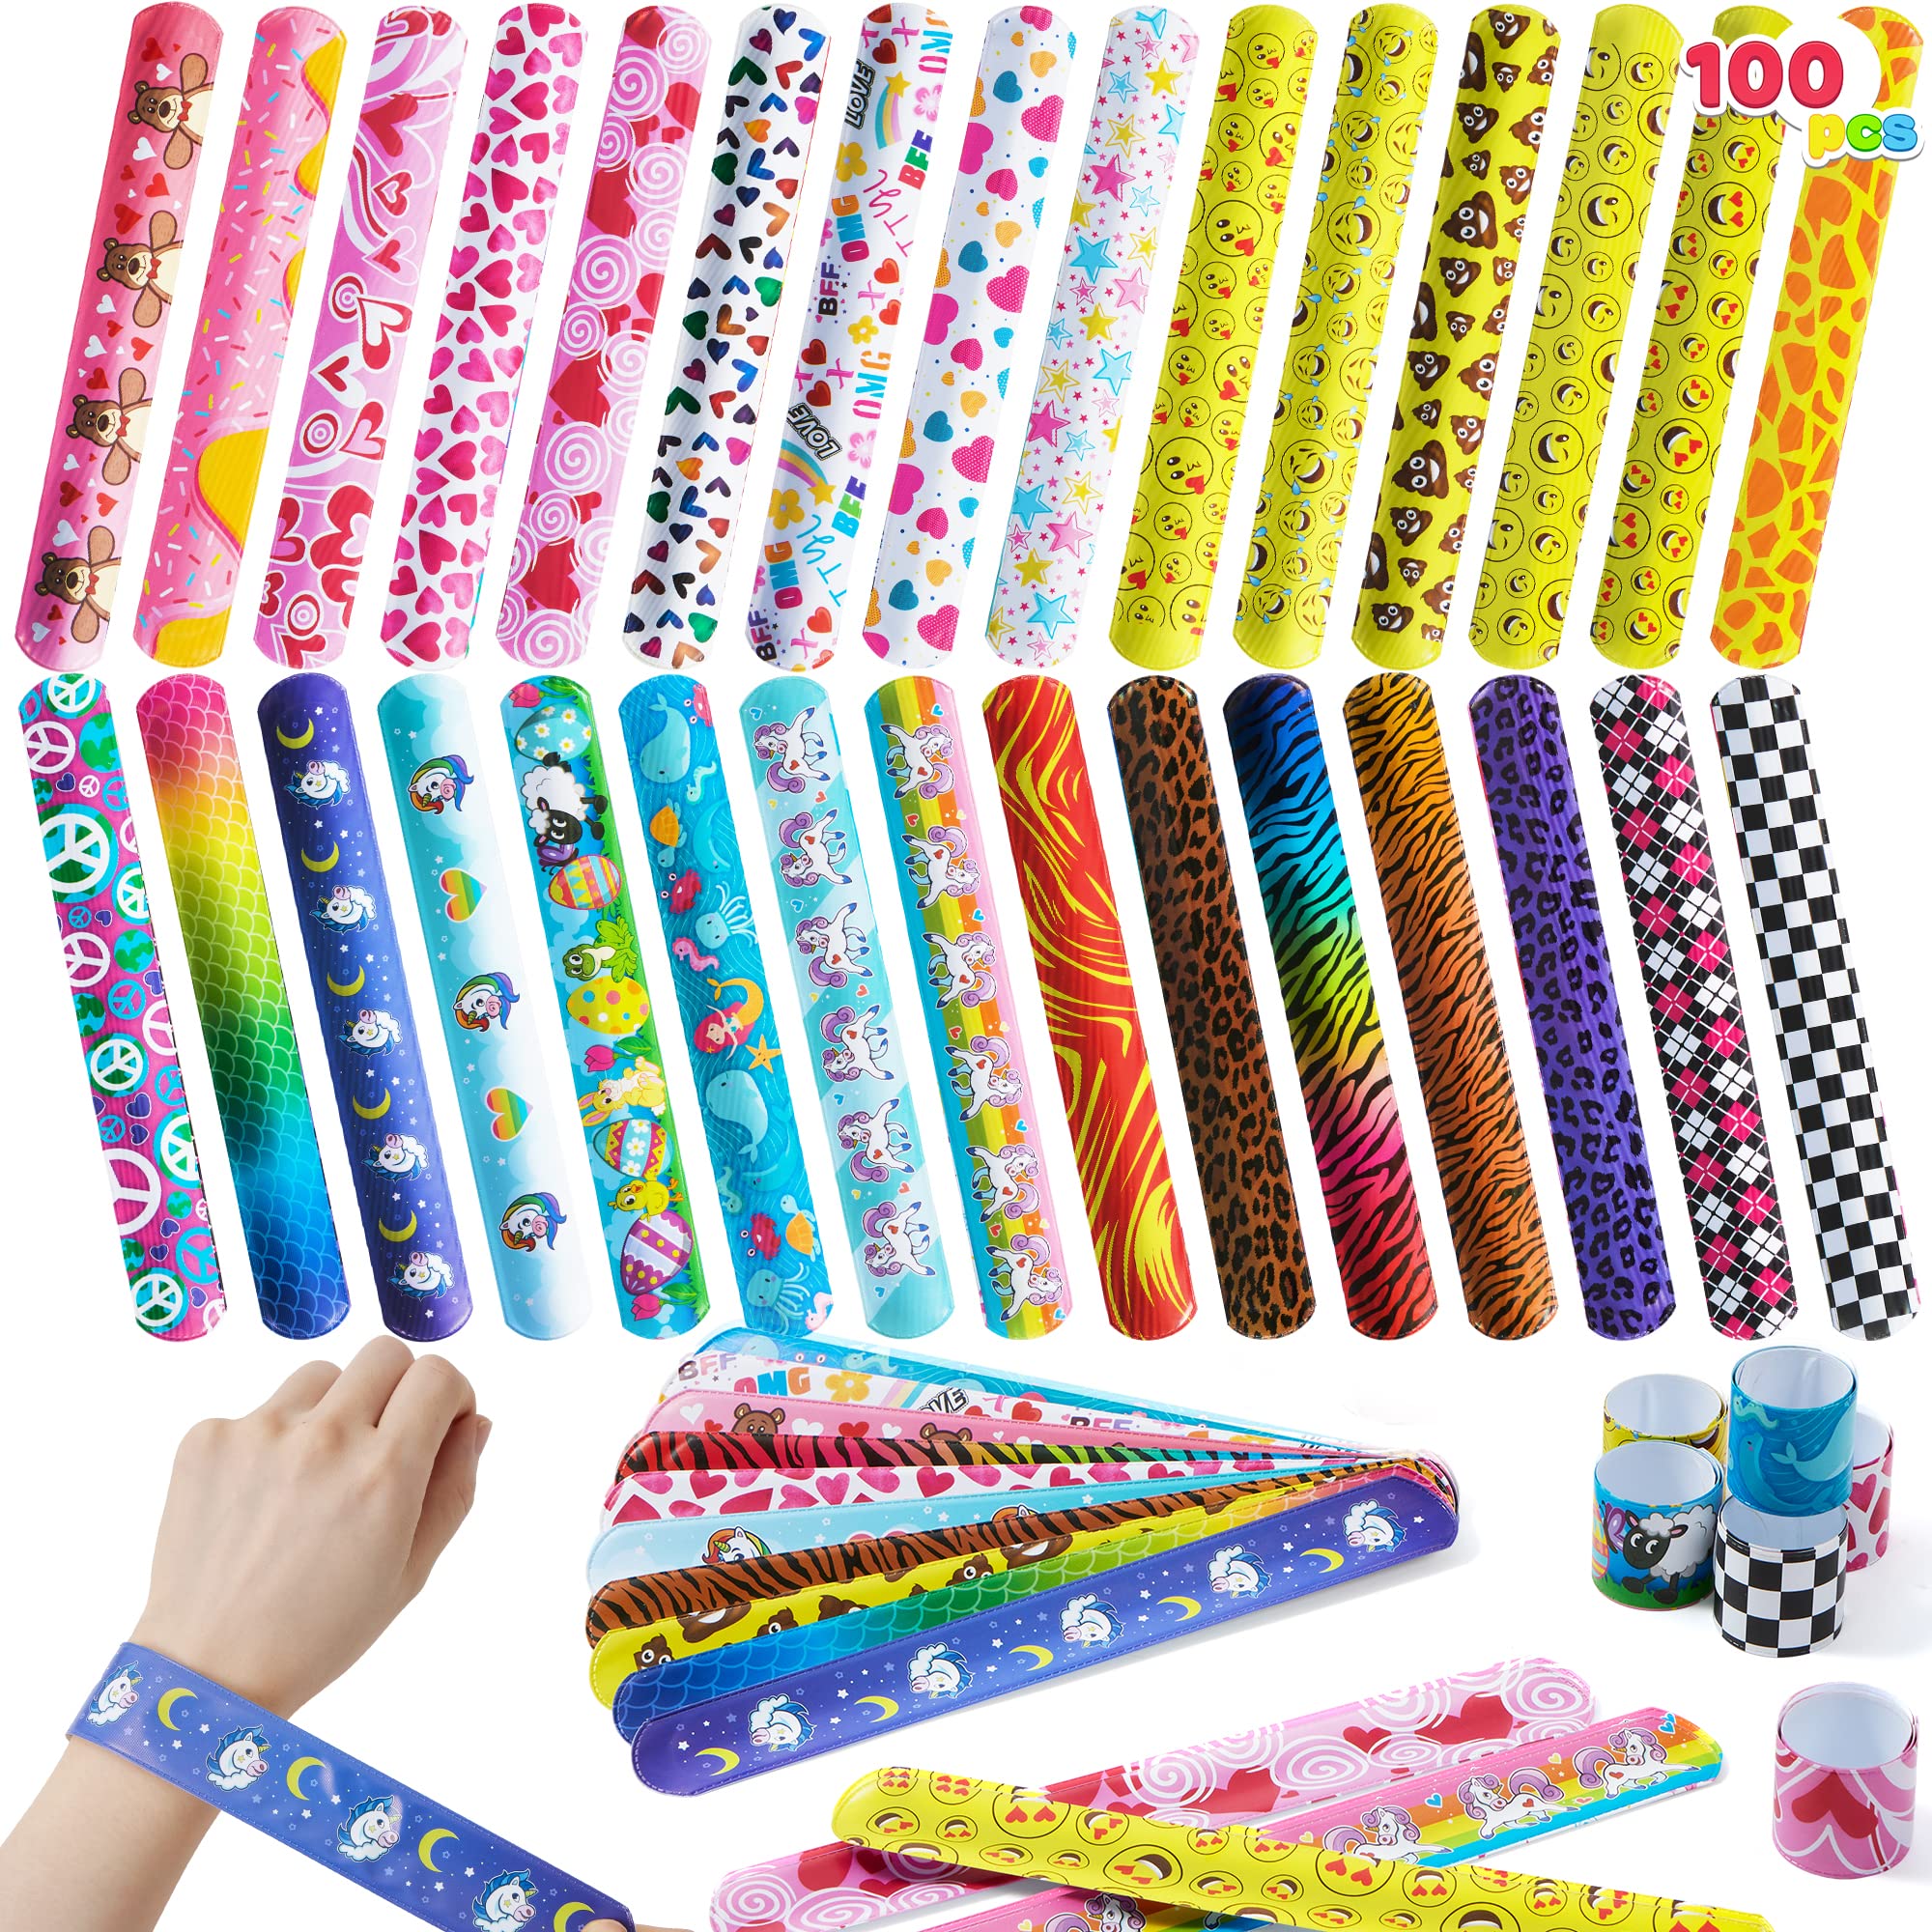 JOYIN 100 PCs Slap Bracelets Toys Valentines Day Party Favors (30 Designs) with Colorful Hearts Animal and Unicorn, Valentine Classroom Prizes Exchanging Gifts